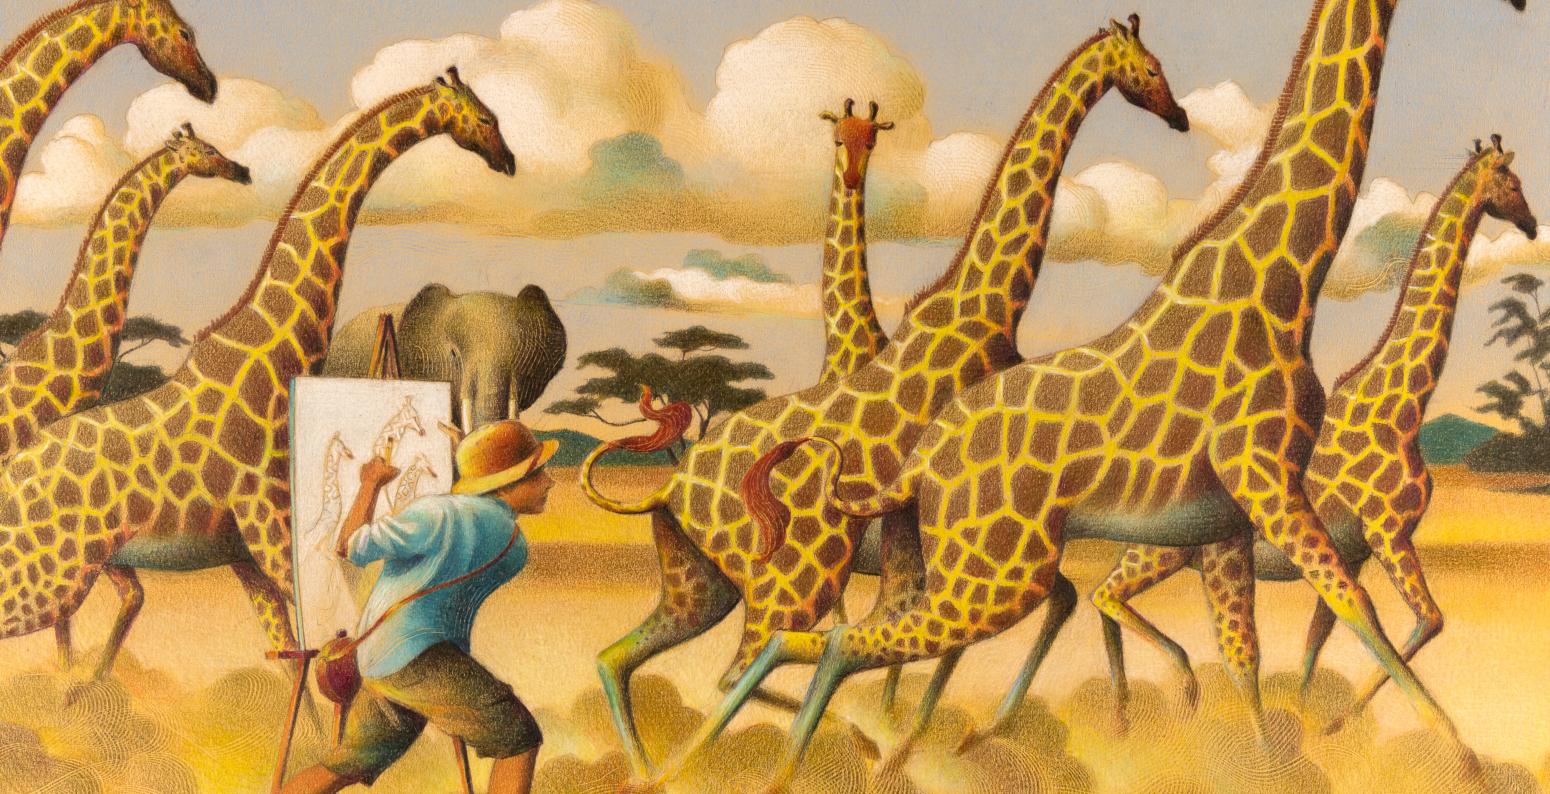 A boy standing next to an easel looking at a group of giraffes running by.